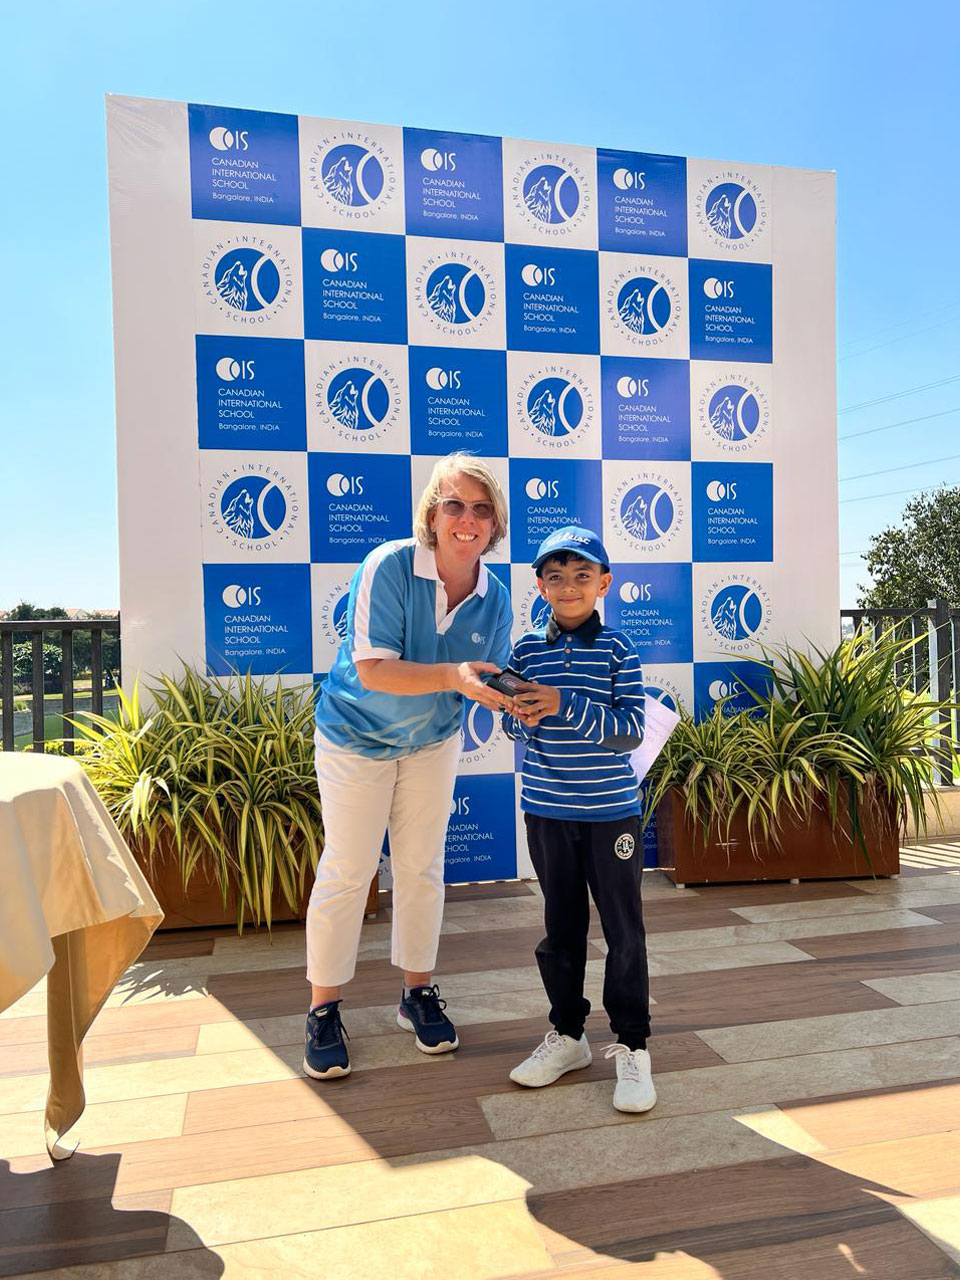 Advaita Mahesh finished 3rd in the 'E' Boys category at the CIS interschool Golf Championship held at Prestige Augusta Golf Village in Bangalore.